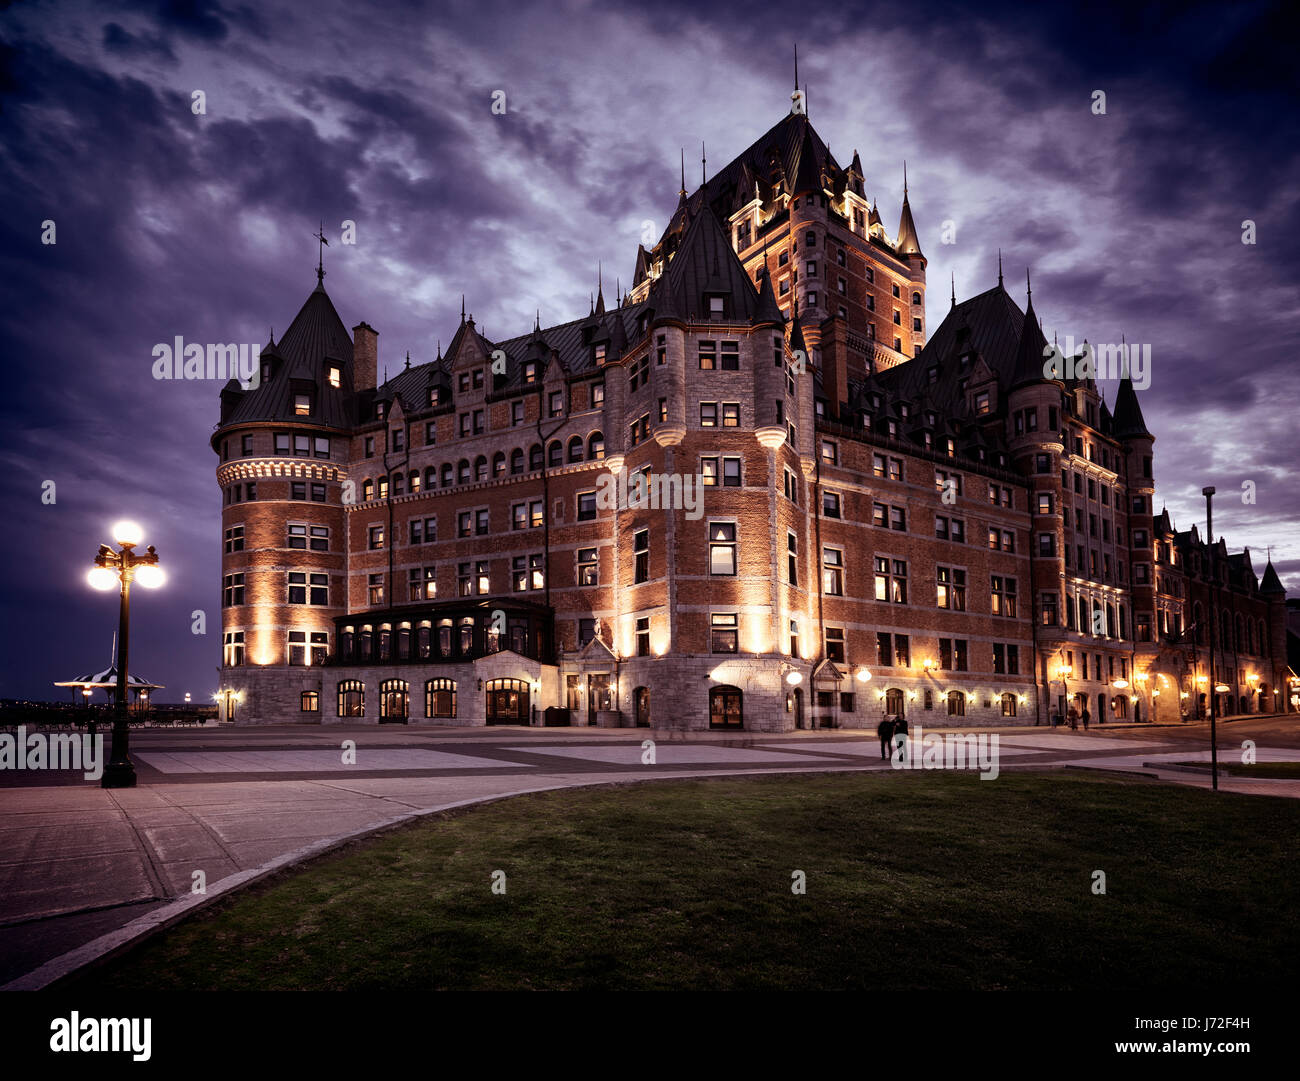 License available at MaximImages.com - Fairmont Le Chateau Frontenac with dramatic night sky lit by street lights, grand hotel. Old Quebec, Canada Stock Photo